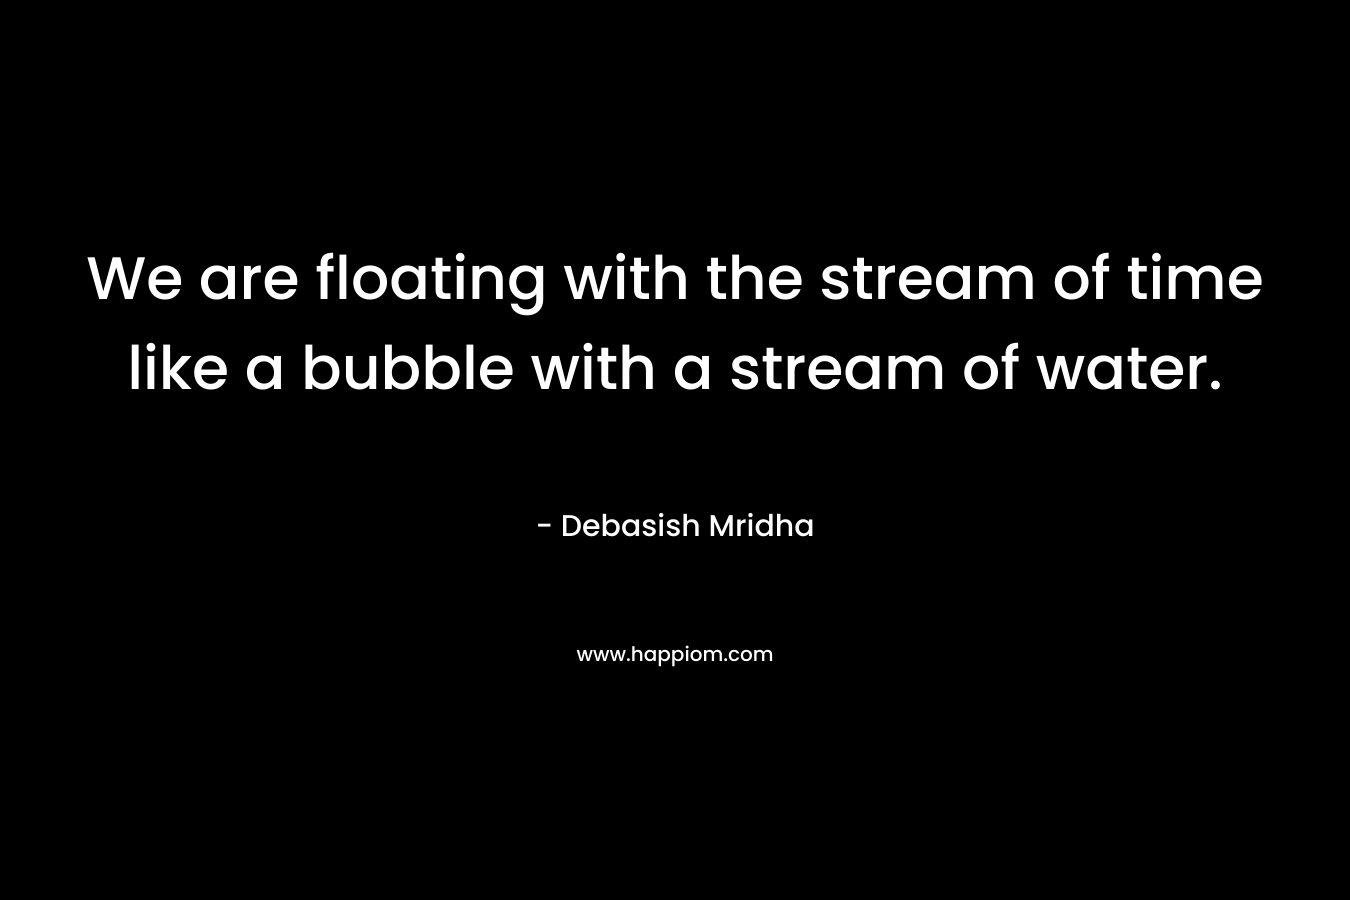 We are floating with the stream of time like a bubble with a stream of water.